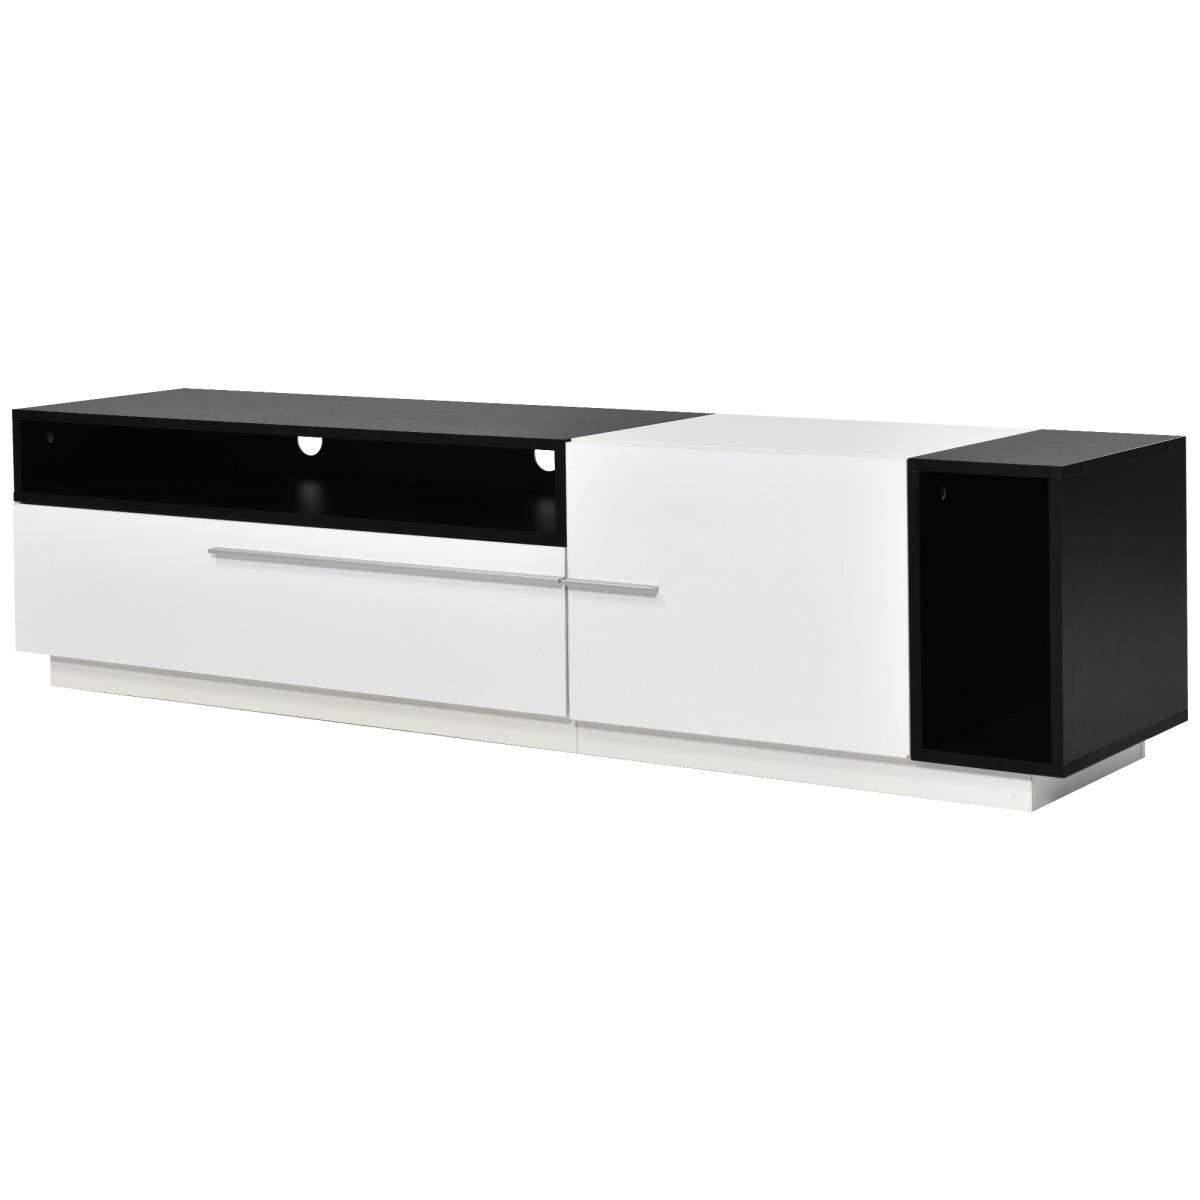 ON-TREND Two-tone Design Tv Stand with Silver Handles, Uv High-Gloss Media Console for TVs Up to 70